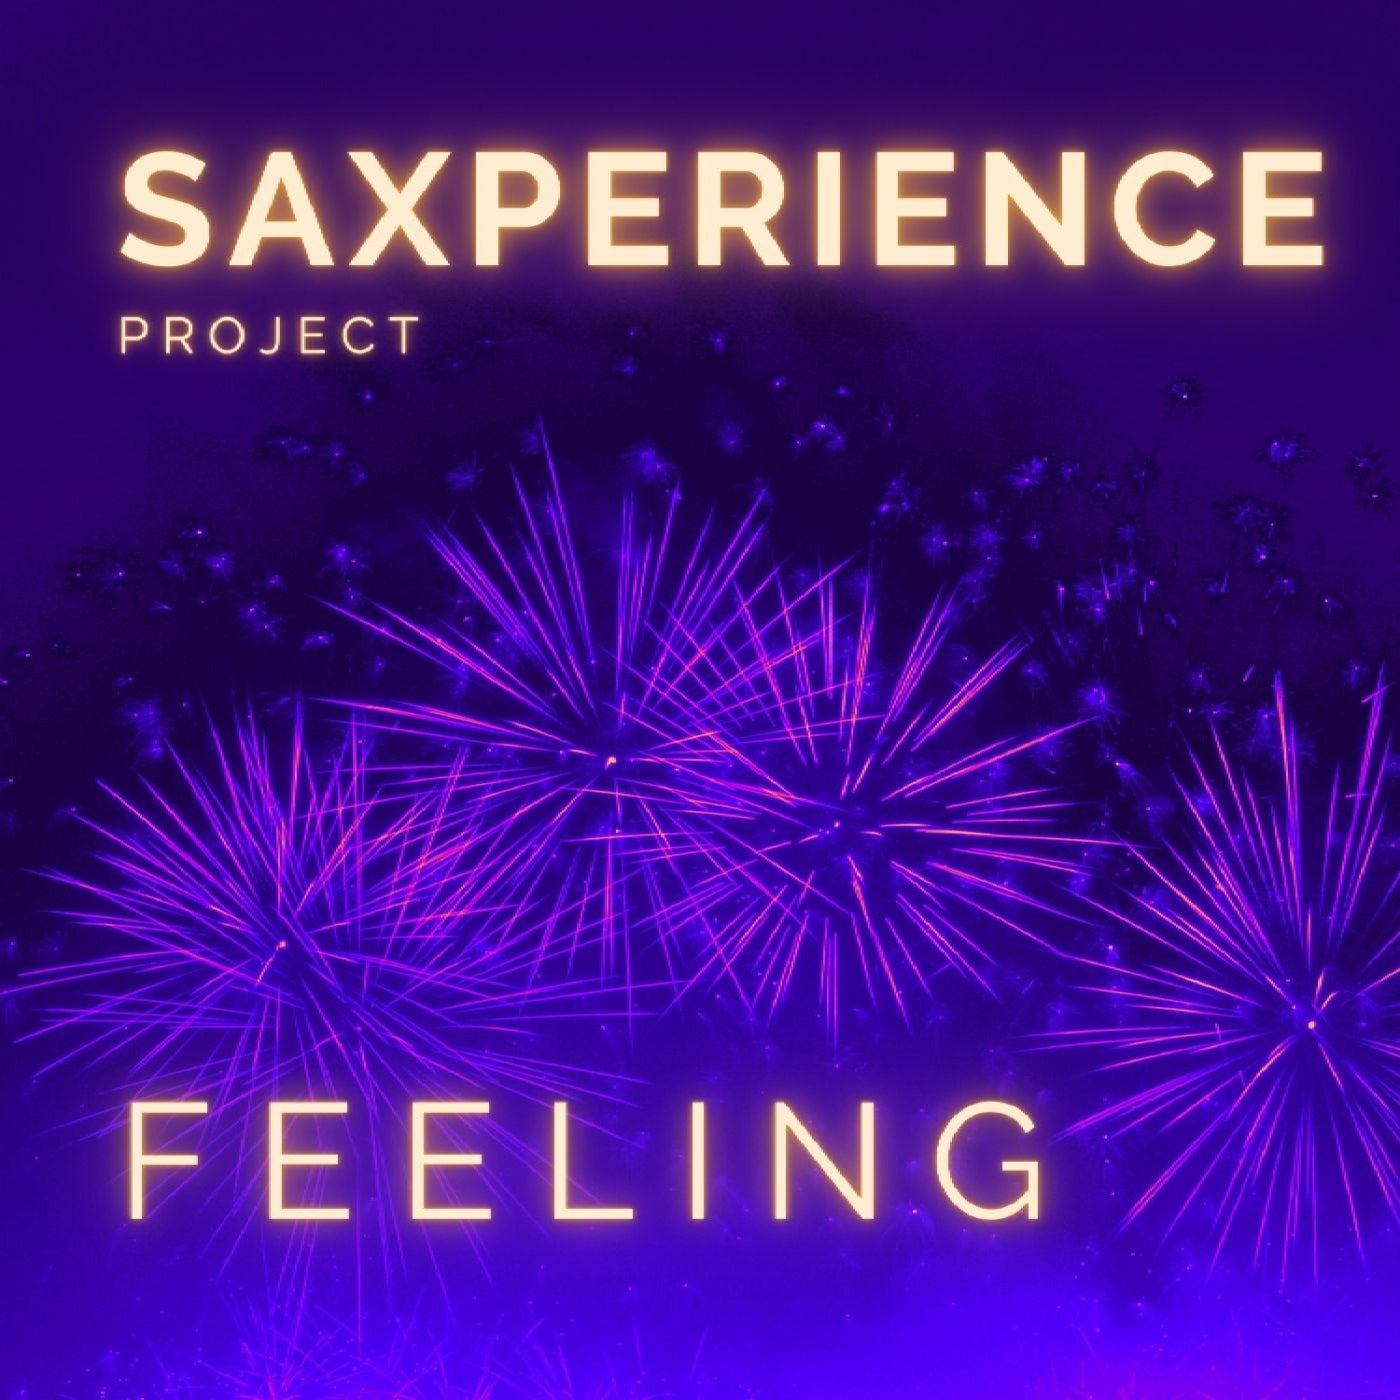 Feeling by Saxperience Project